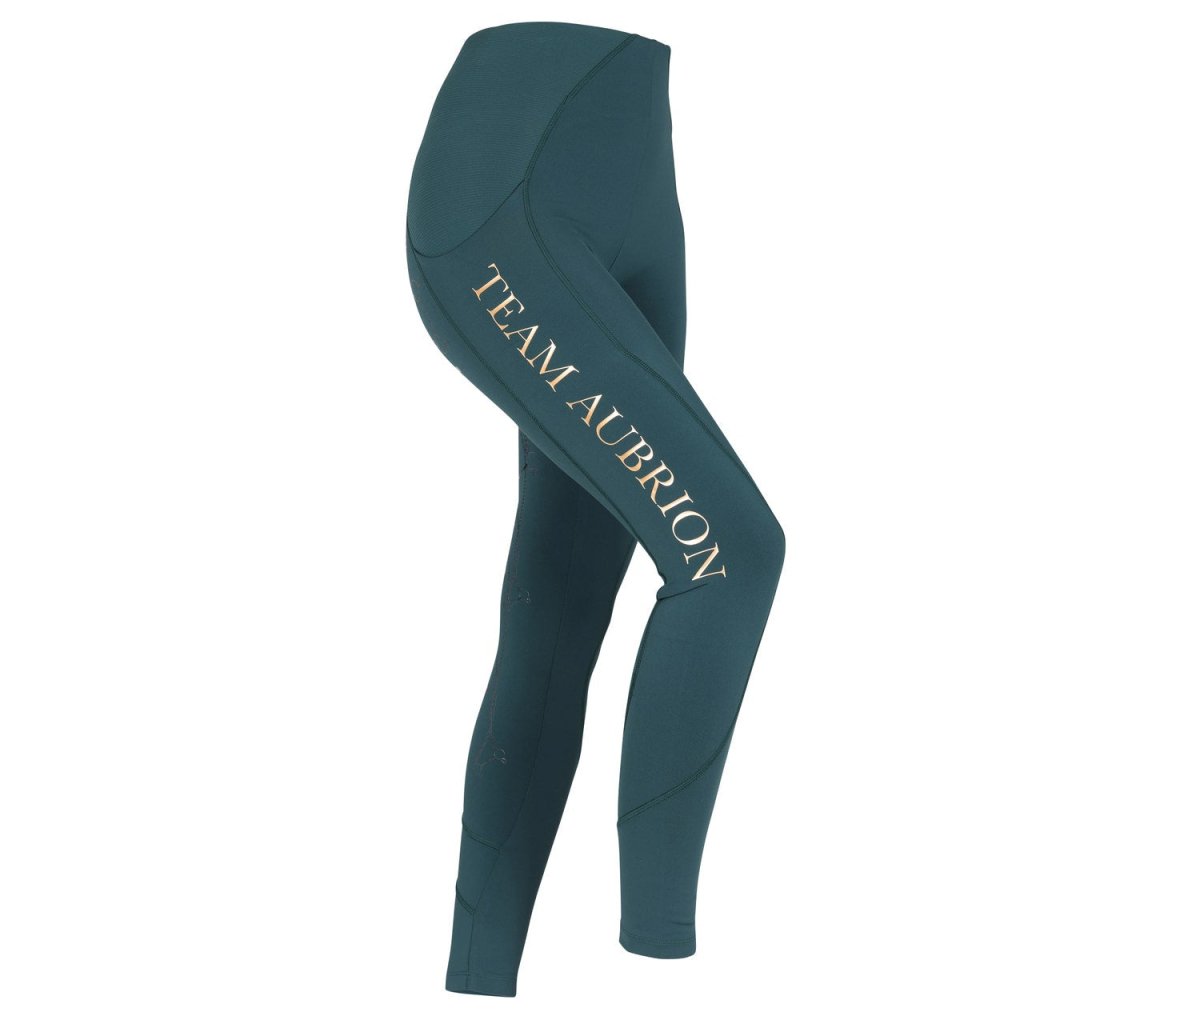 Aubrion SS24 Team Riding Tights - Young Rider - Green - 11/12 Years